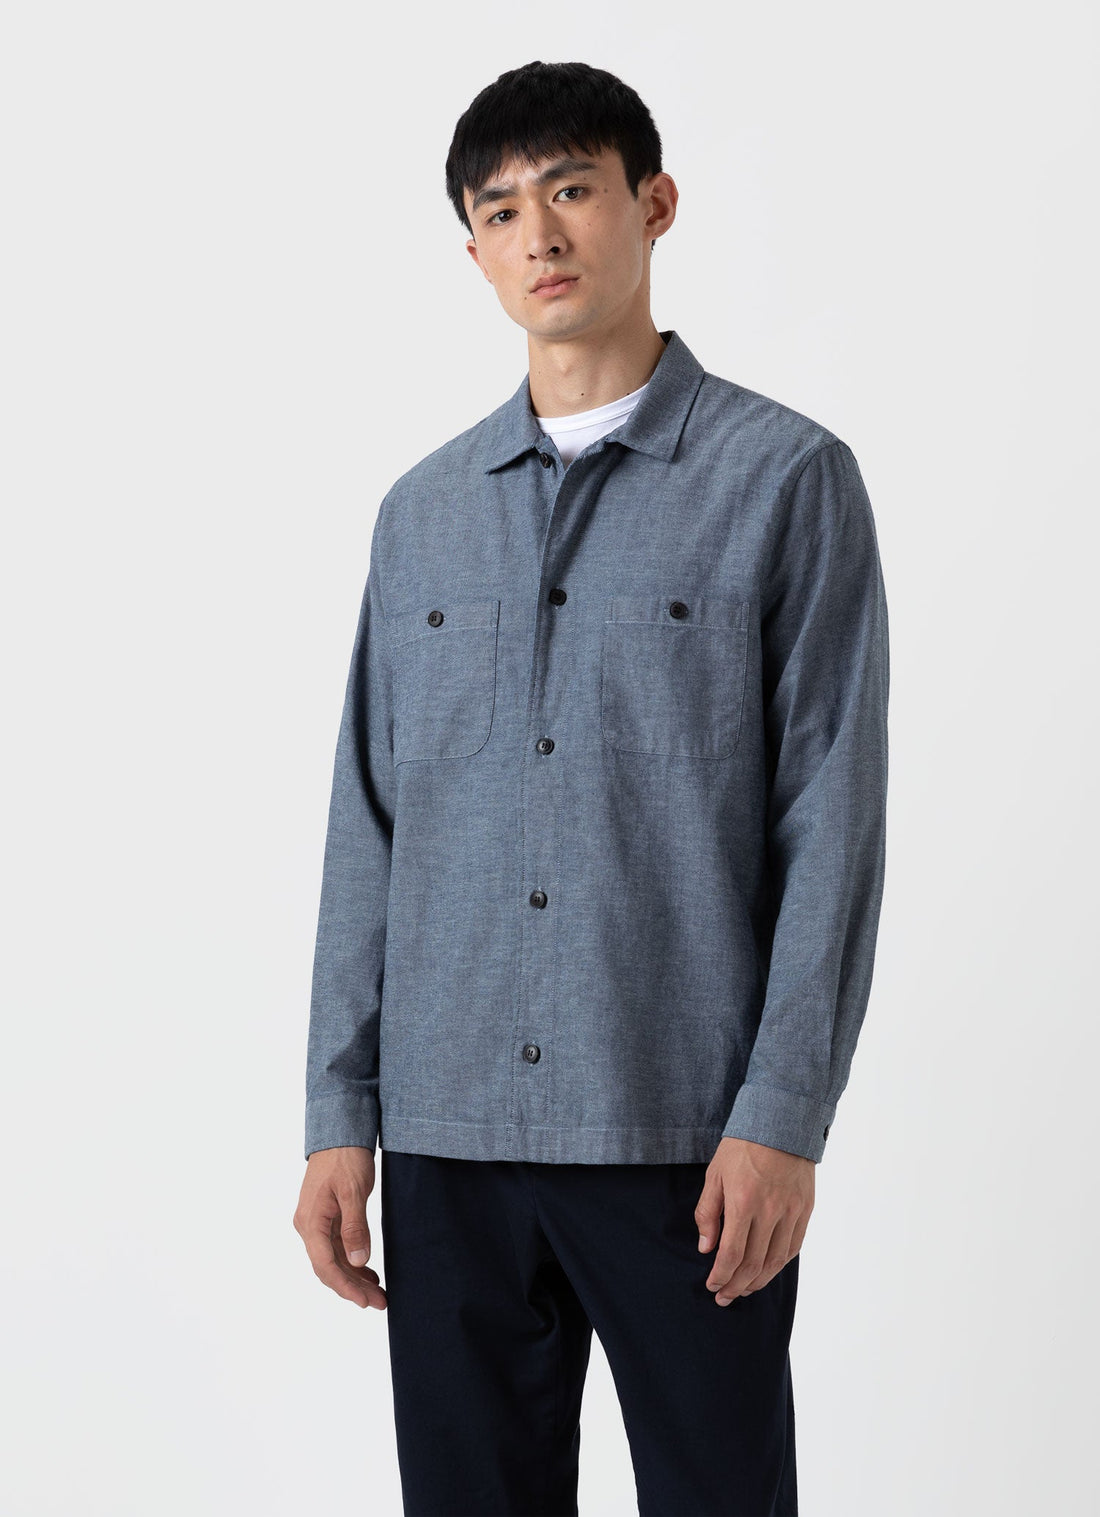 Men's Japanese Chambray Overshirt in Mid Blue Chambray